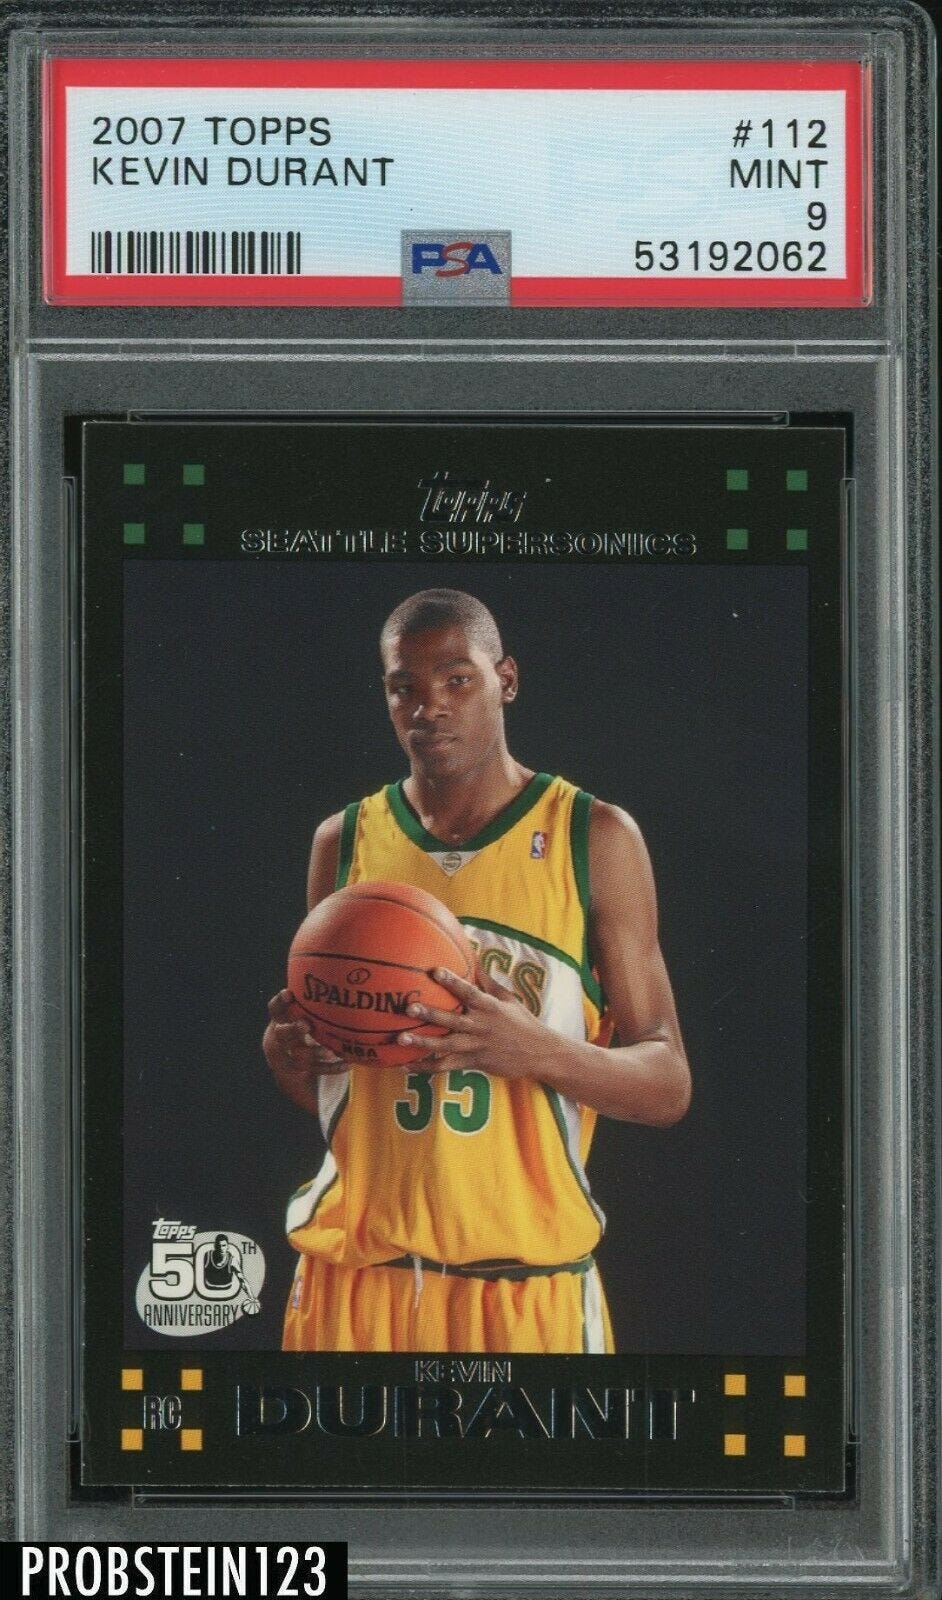 Image 1 - 2007-08-Topps-112-Kevin-Durant-Supersonics-RC-Rookie-PSA-9-MINT